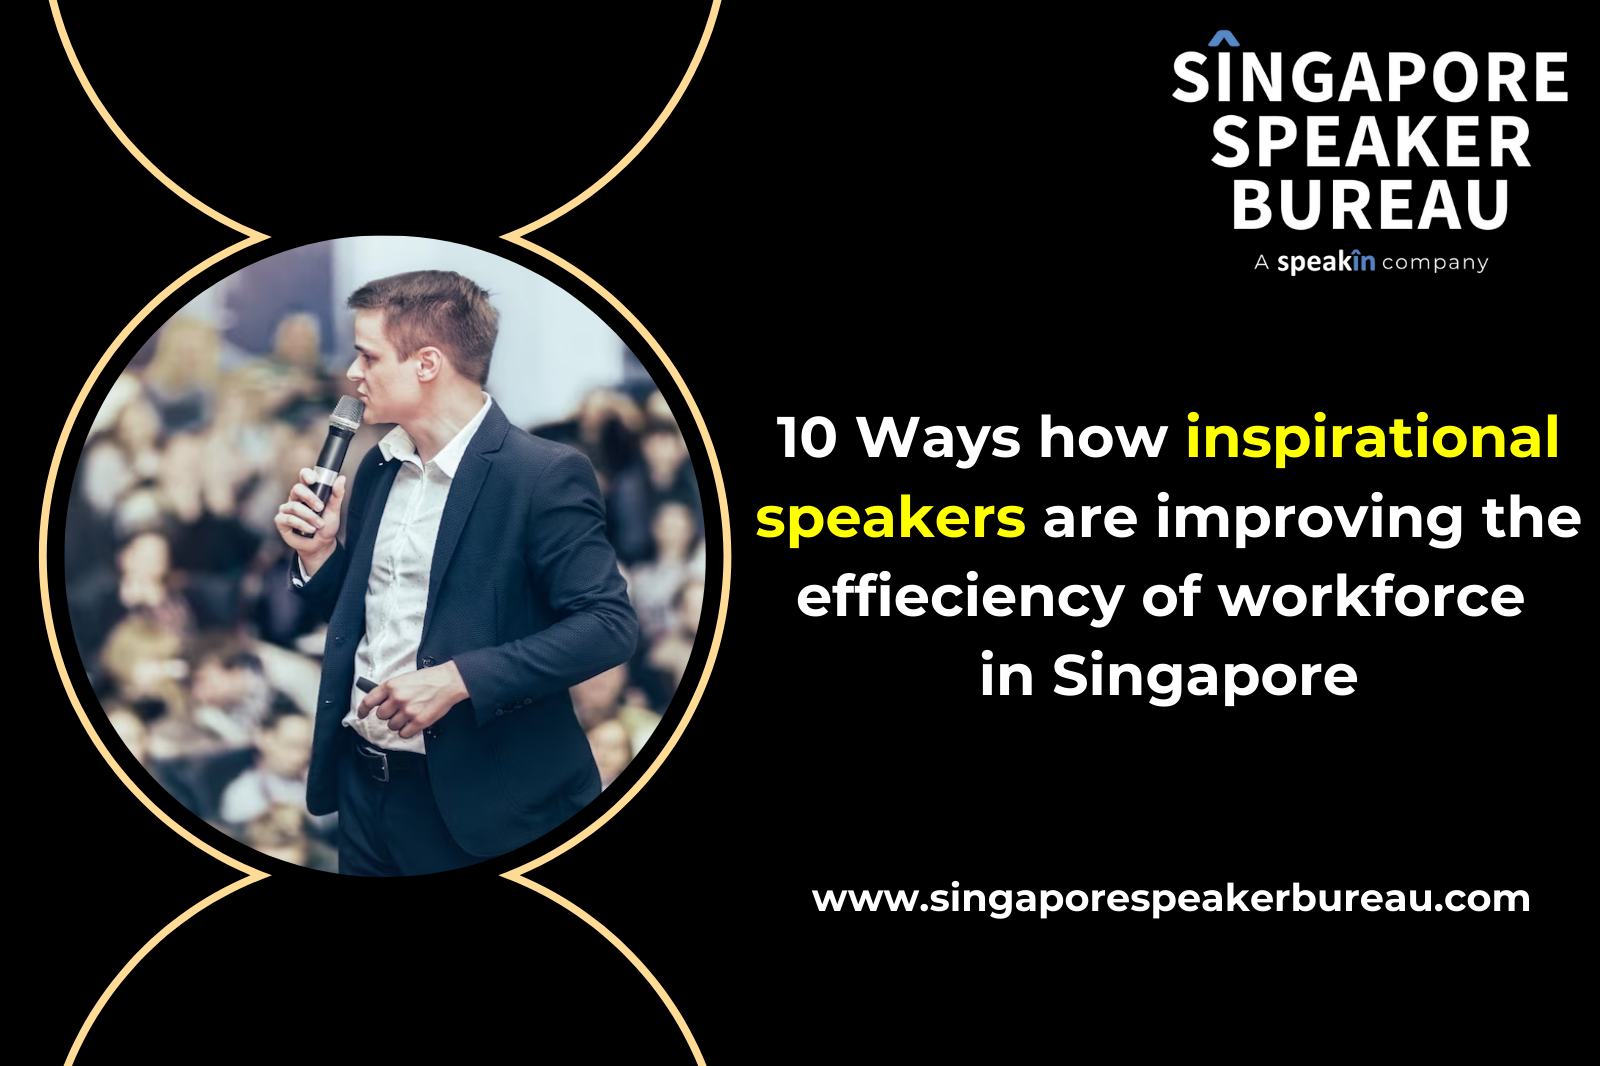 10 Ways how inspirational speakers are improving the efficiency of the workforce in Singapore